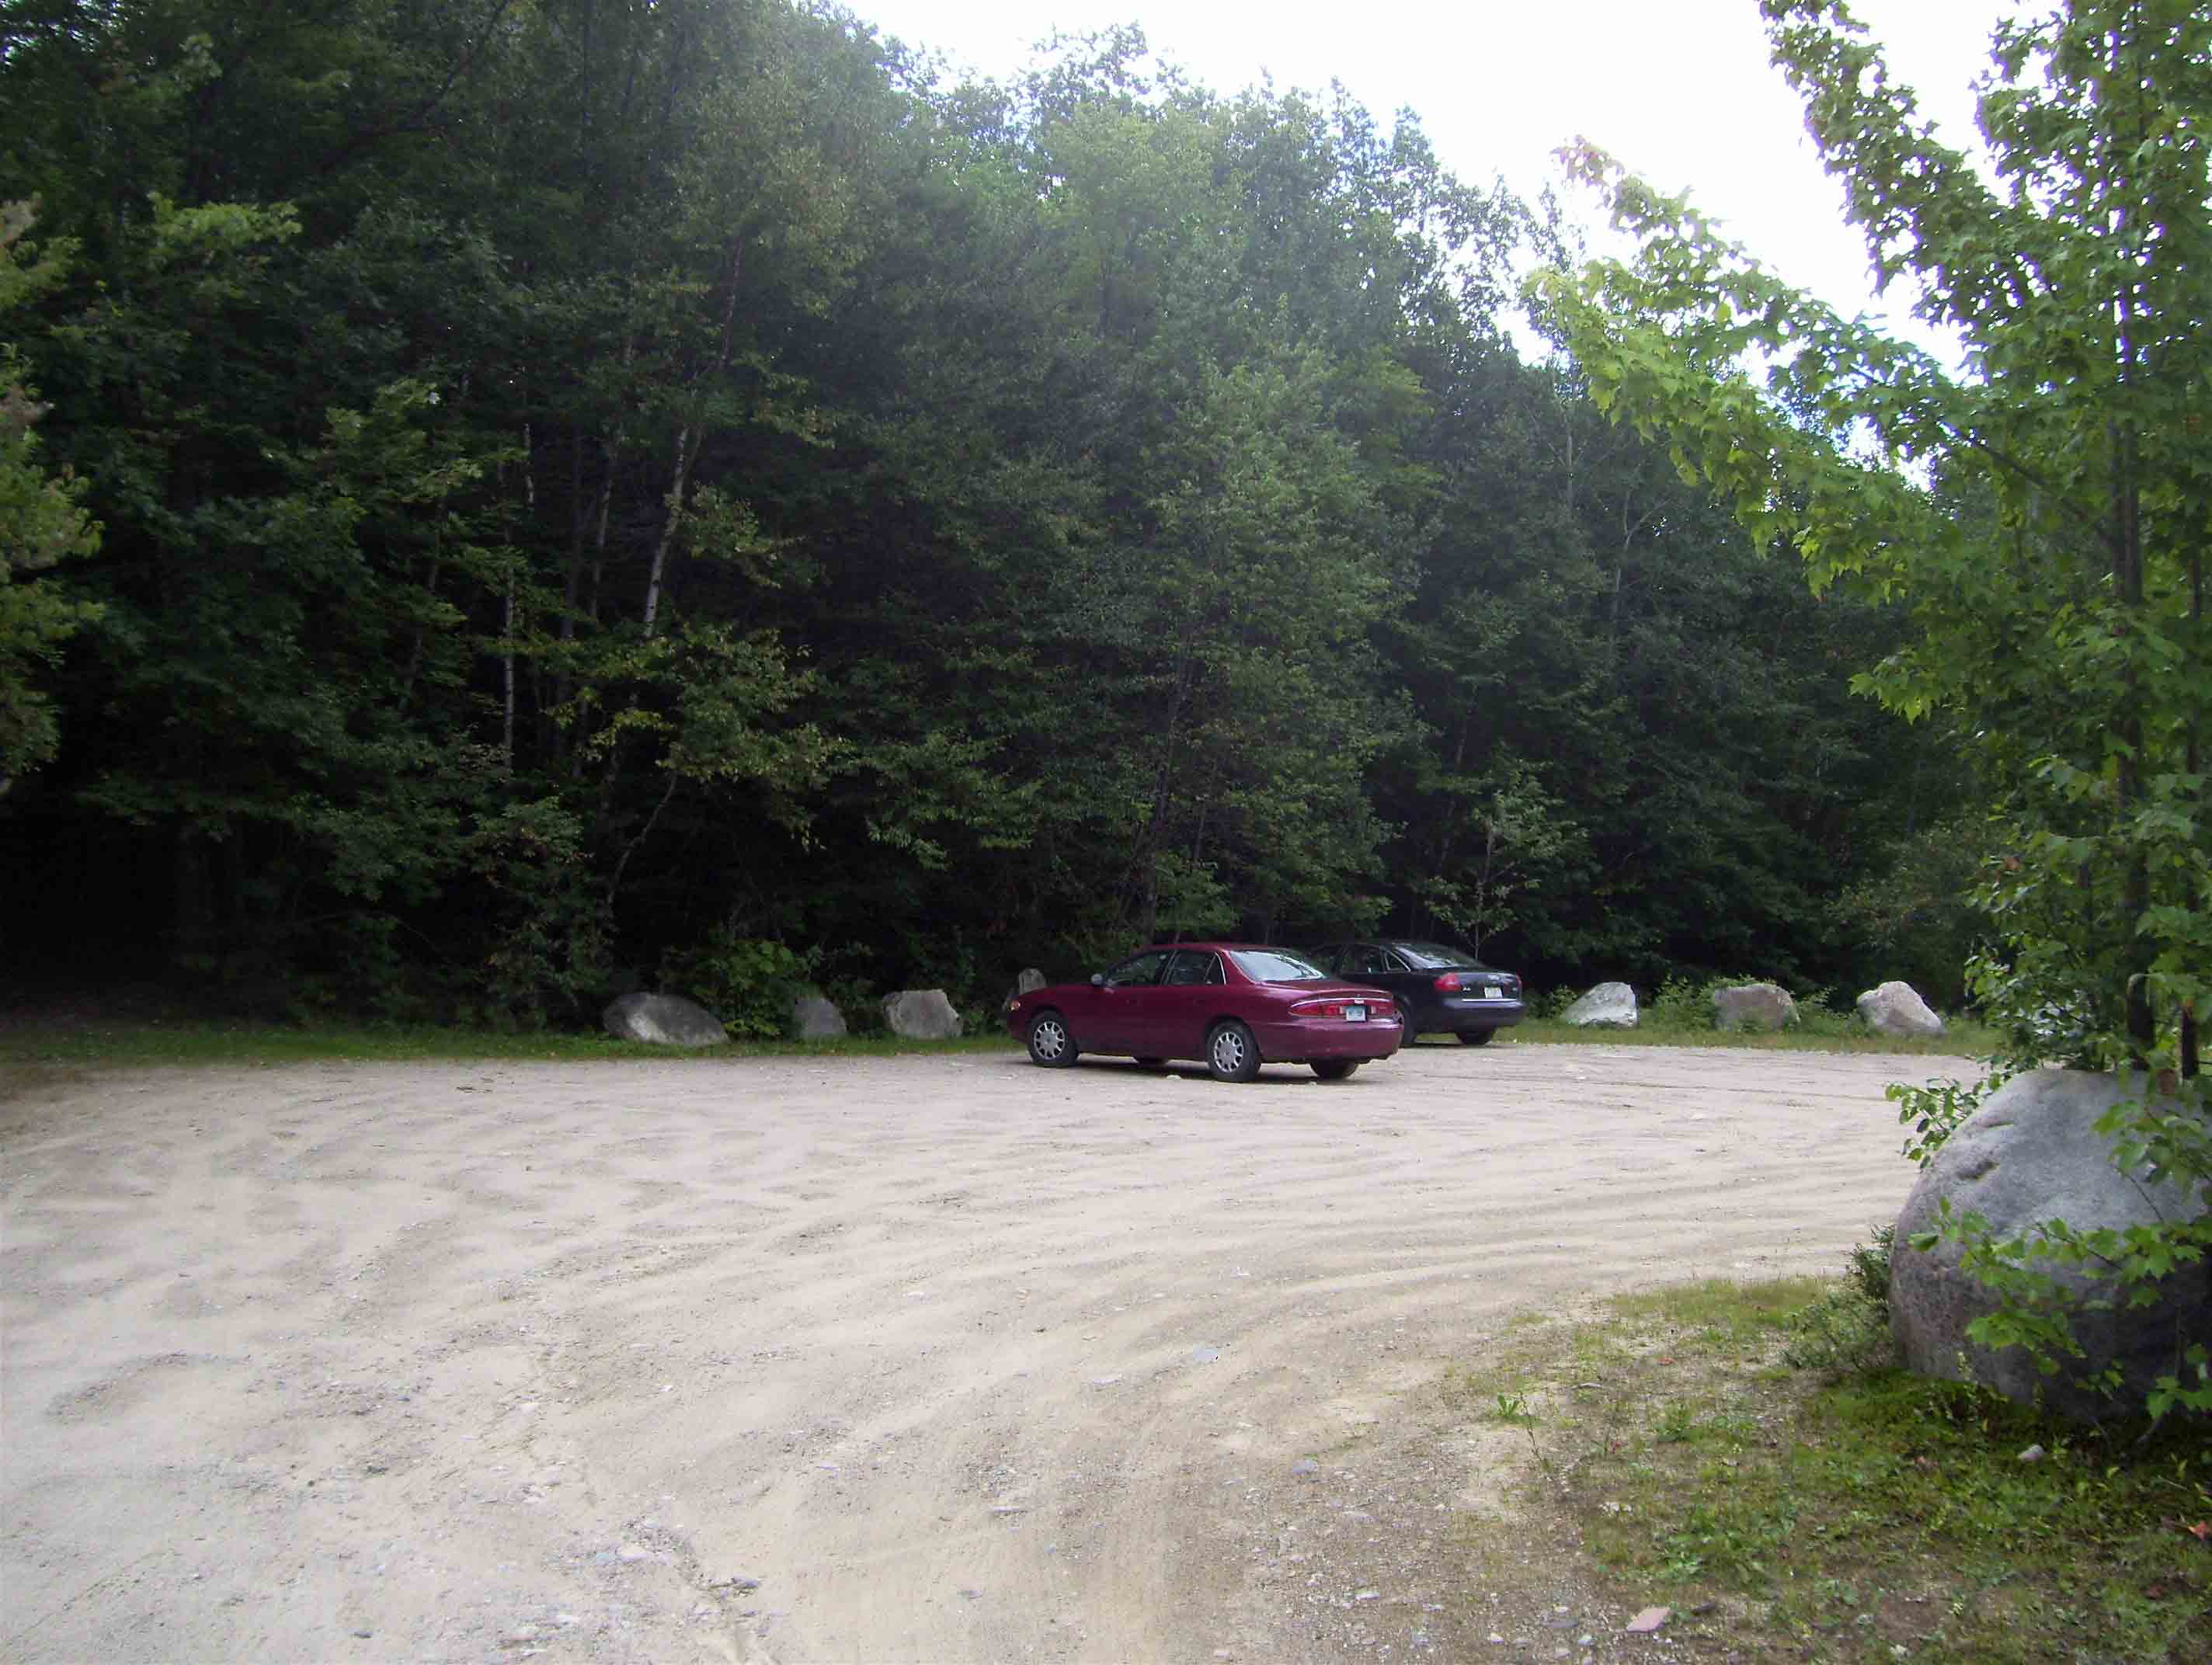 mm 0.2 Parking area at Trailhead for Rattle River Trail (part of AT) on US 2 east of Gorham.  Courtesy dlcul@conncoll.edu